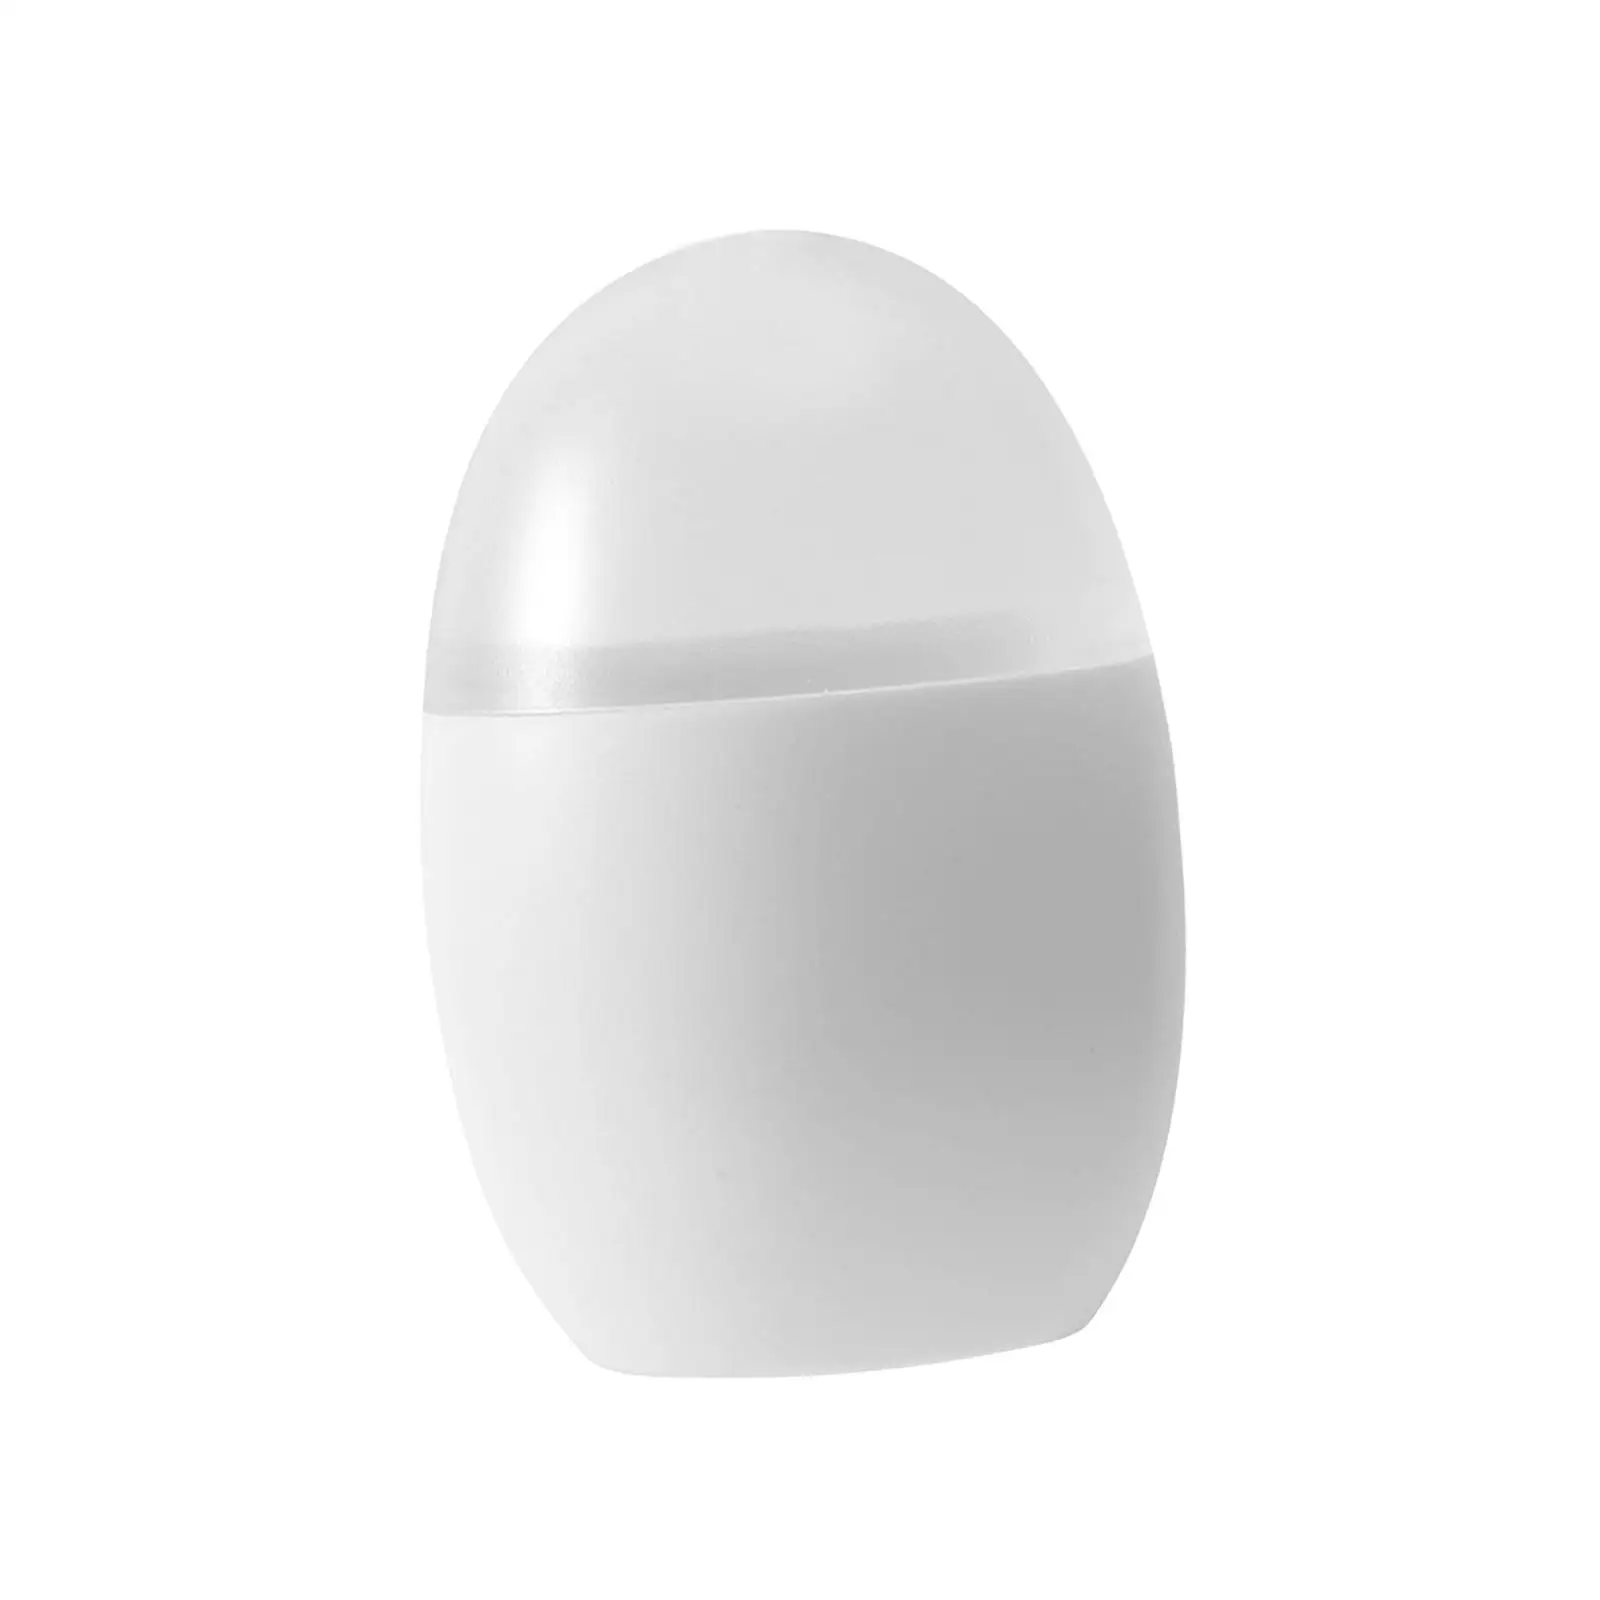 Egg Shape Toothpick Dispenser Stylish with Lid Fridge Suction Reusable for Kitchen Tabletop Dinner Table Home Ornaments